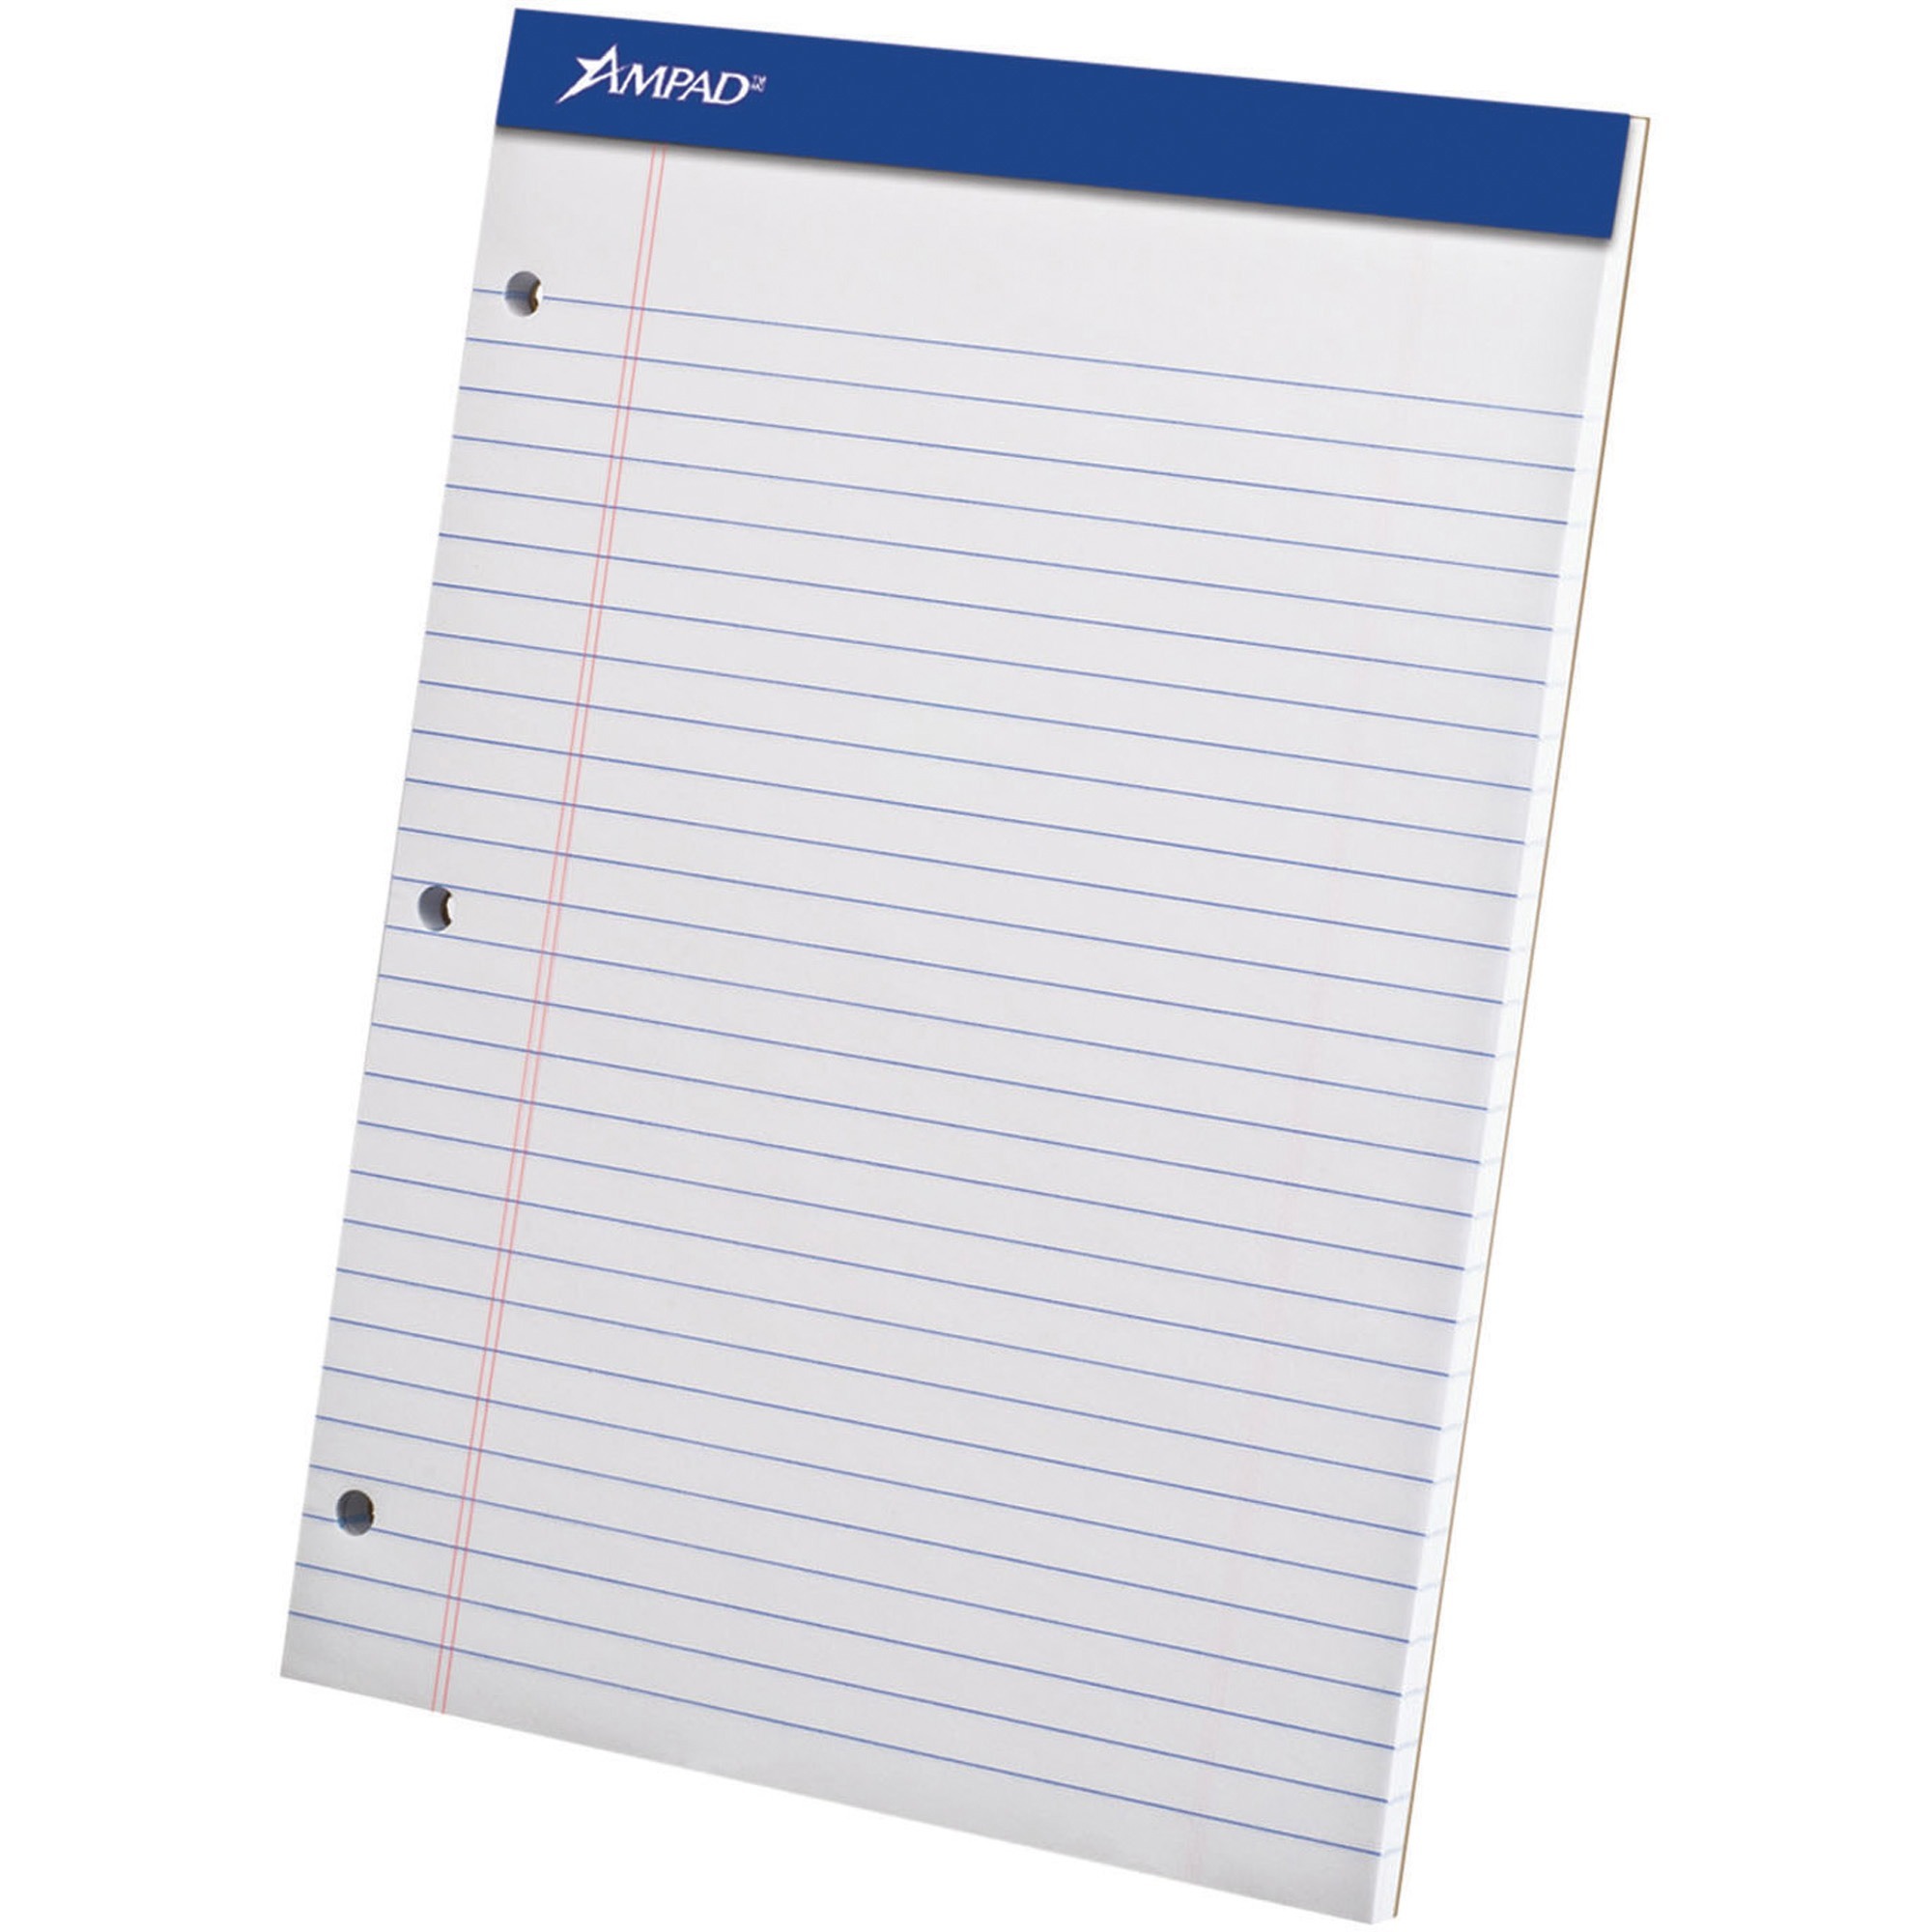 TOPS Wide-ruled Perforated Note Pad - 8 1/2" x 11 3/4" - 50 Sheets